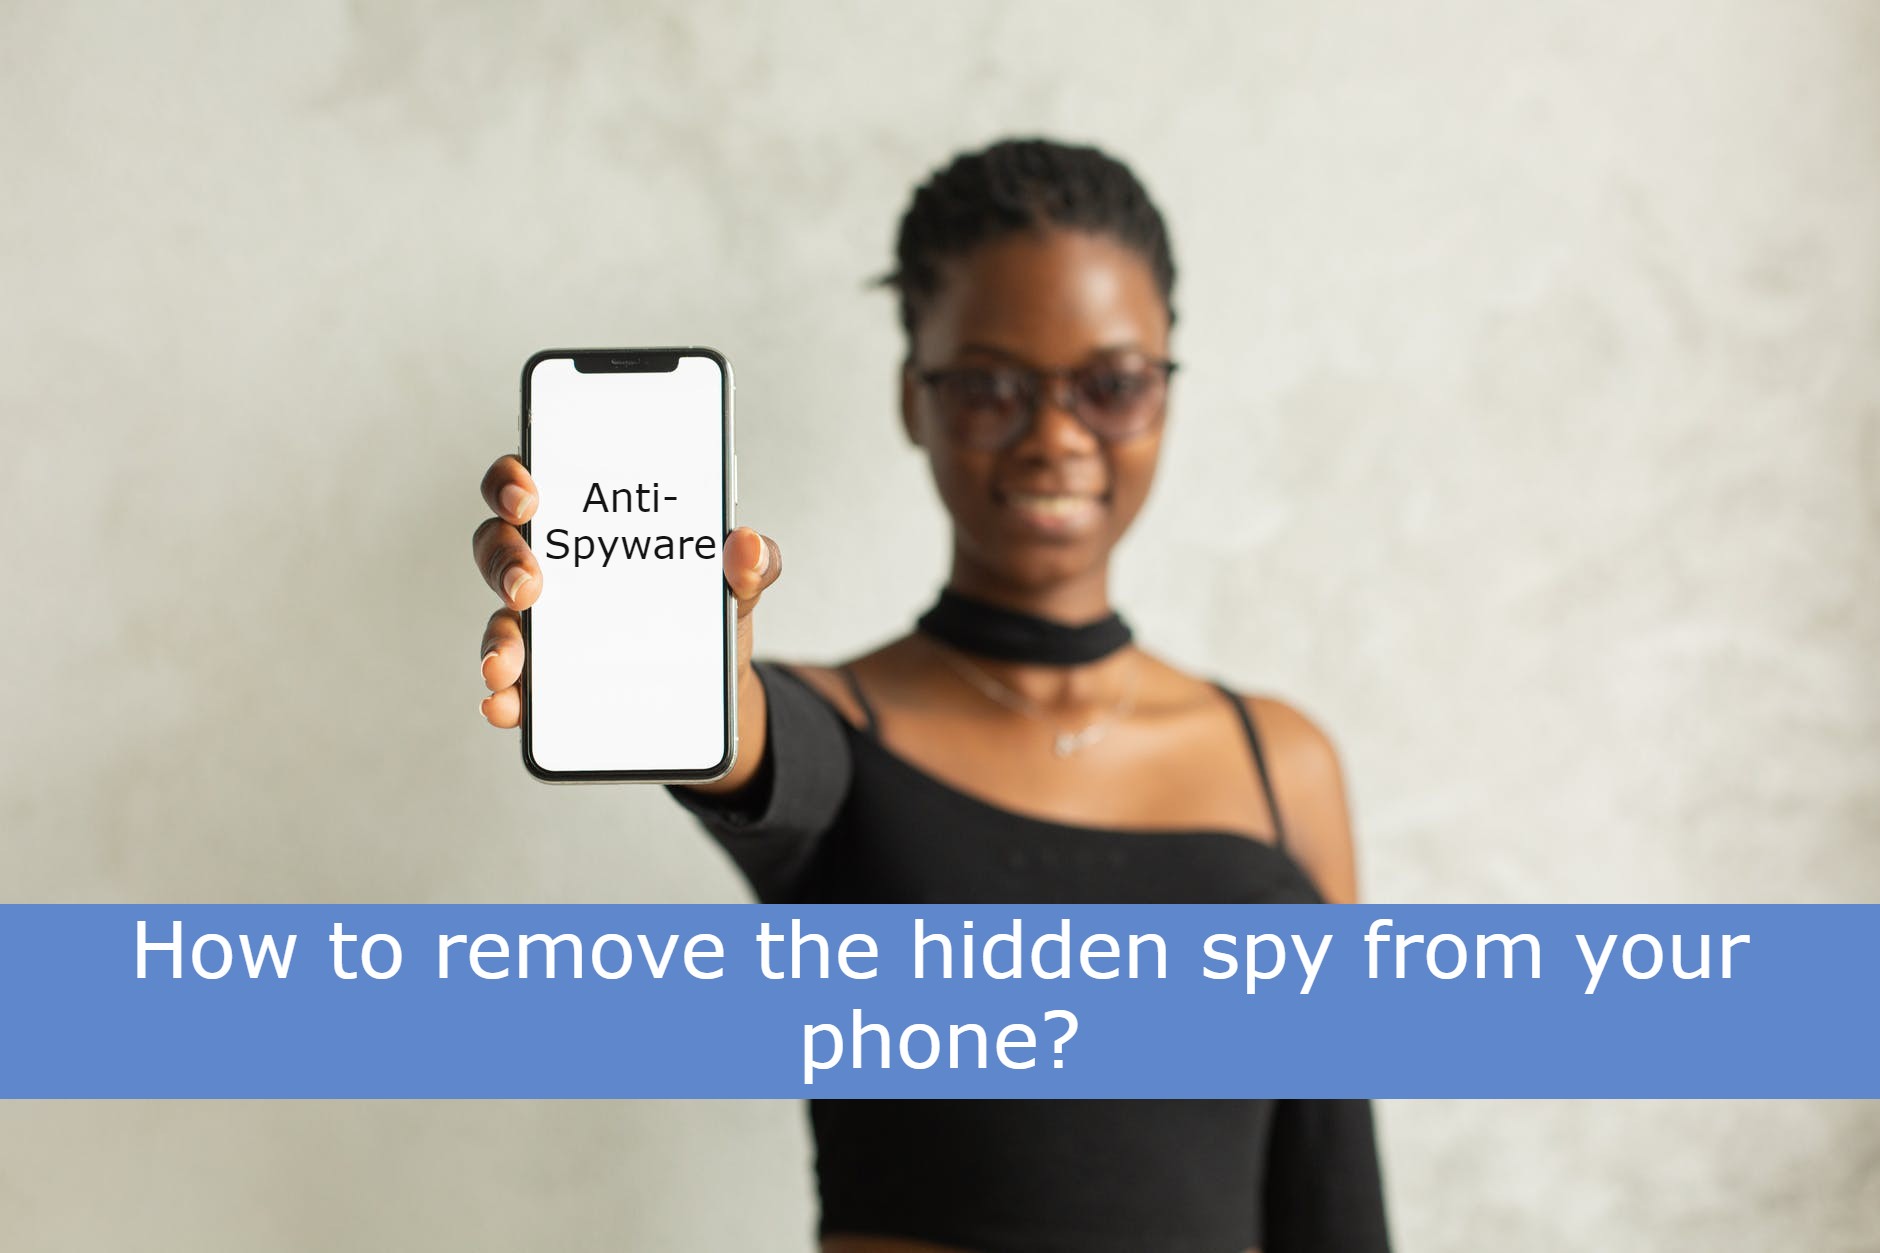 Anti-Spyware: remove the hidden spy app from your Android or iPhone